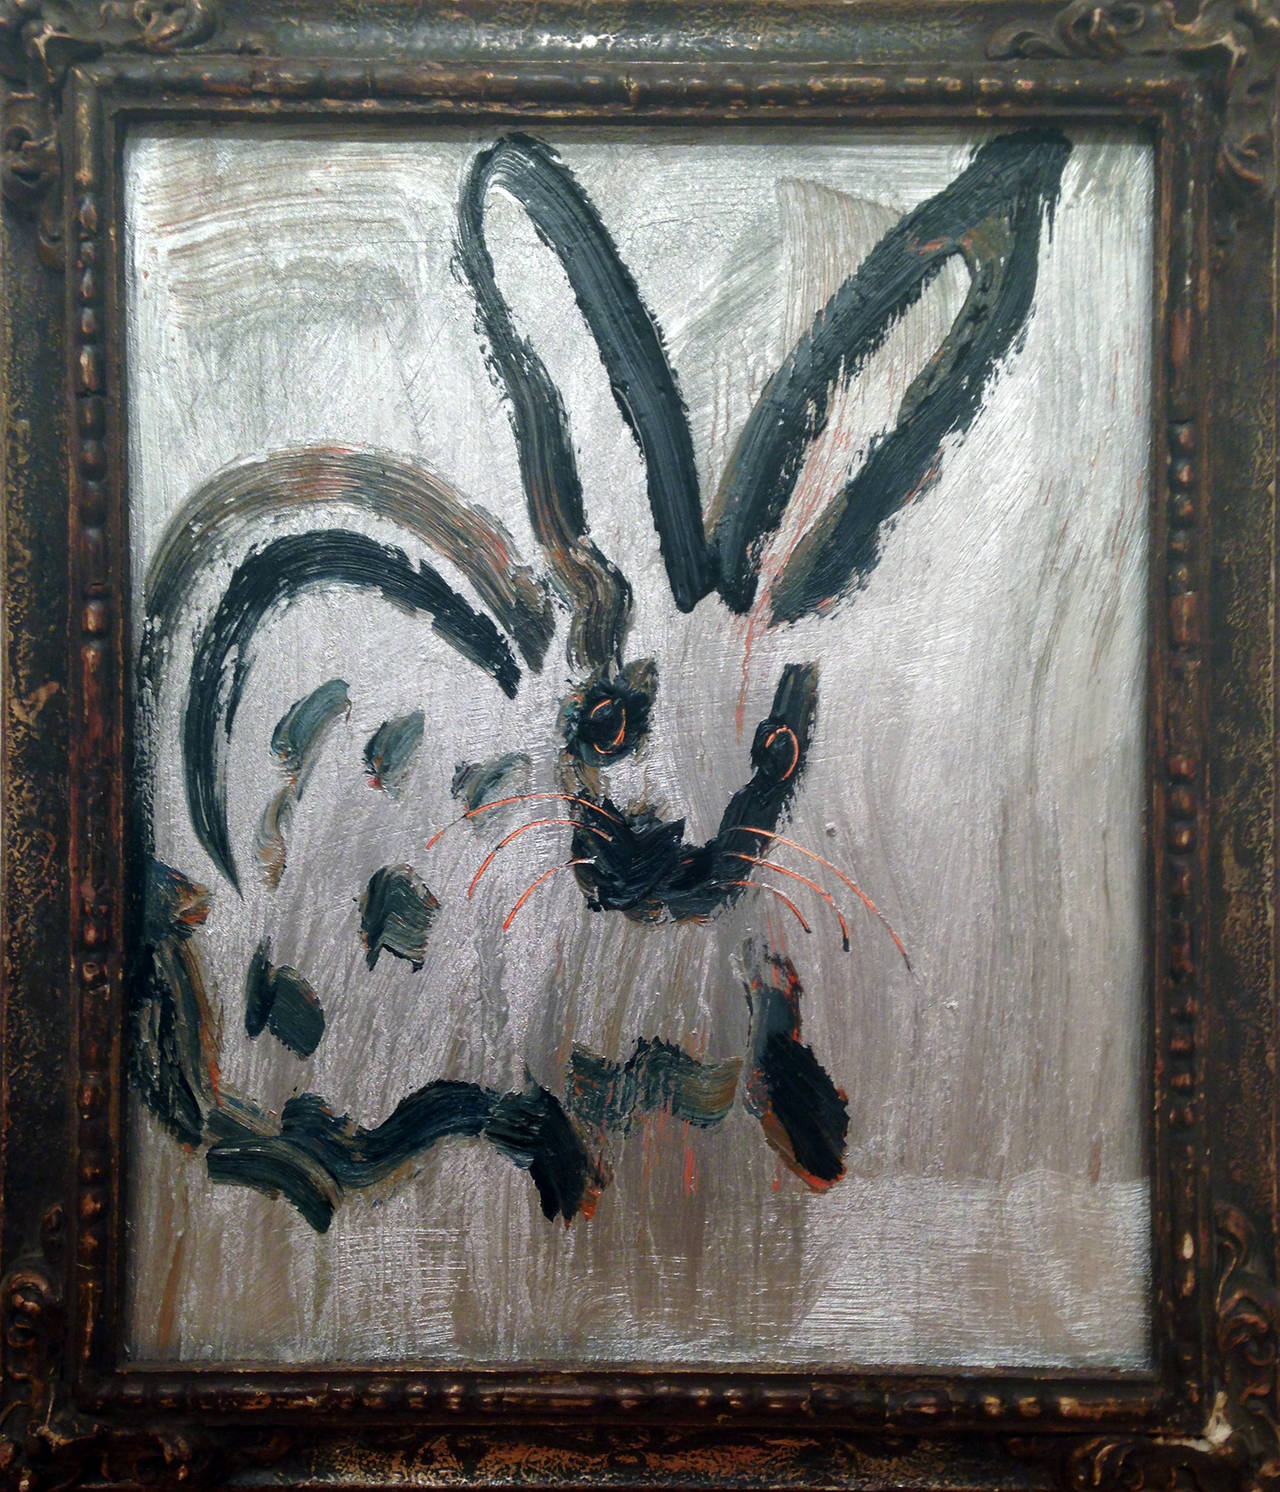 Silver Spotted Bunny - Painting by Hunt Slonem